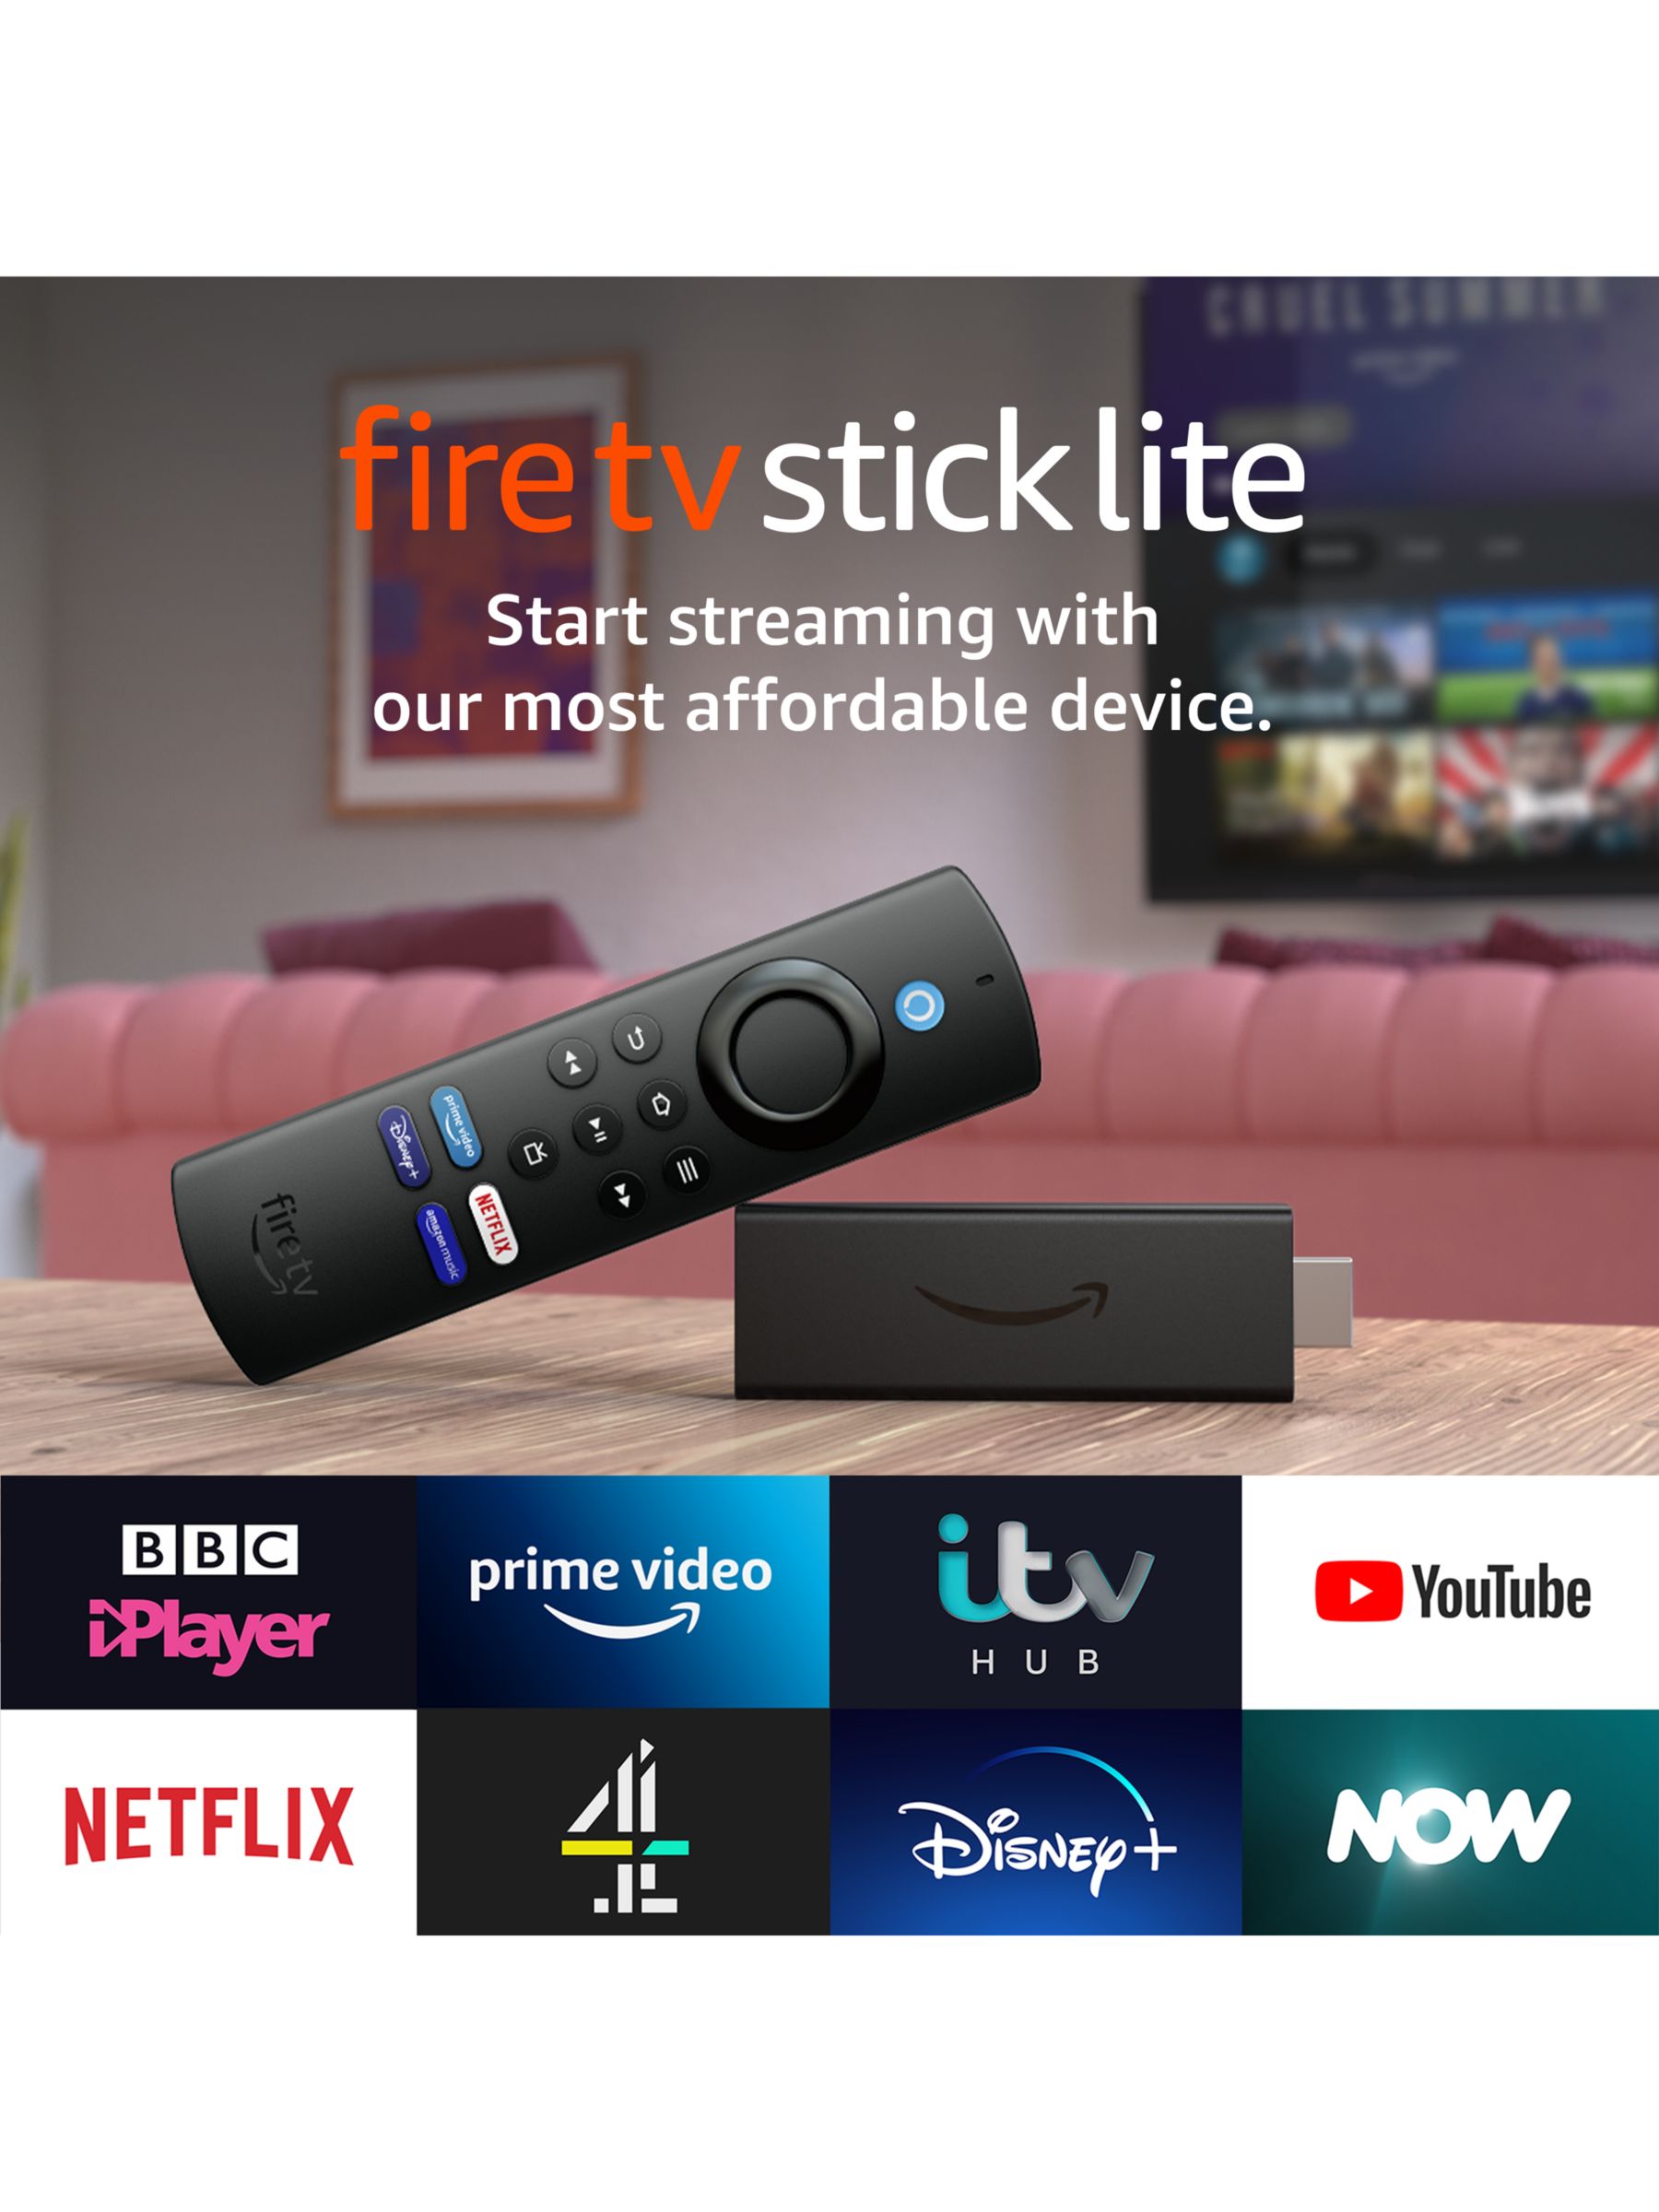 Fire TV Stick Lite HD Streaming Device with Alexa Voice